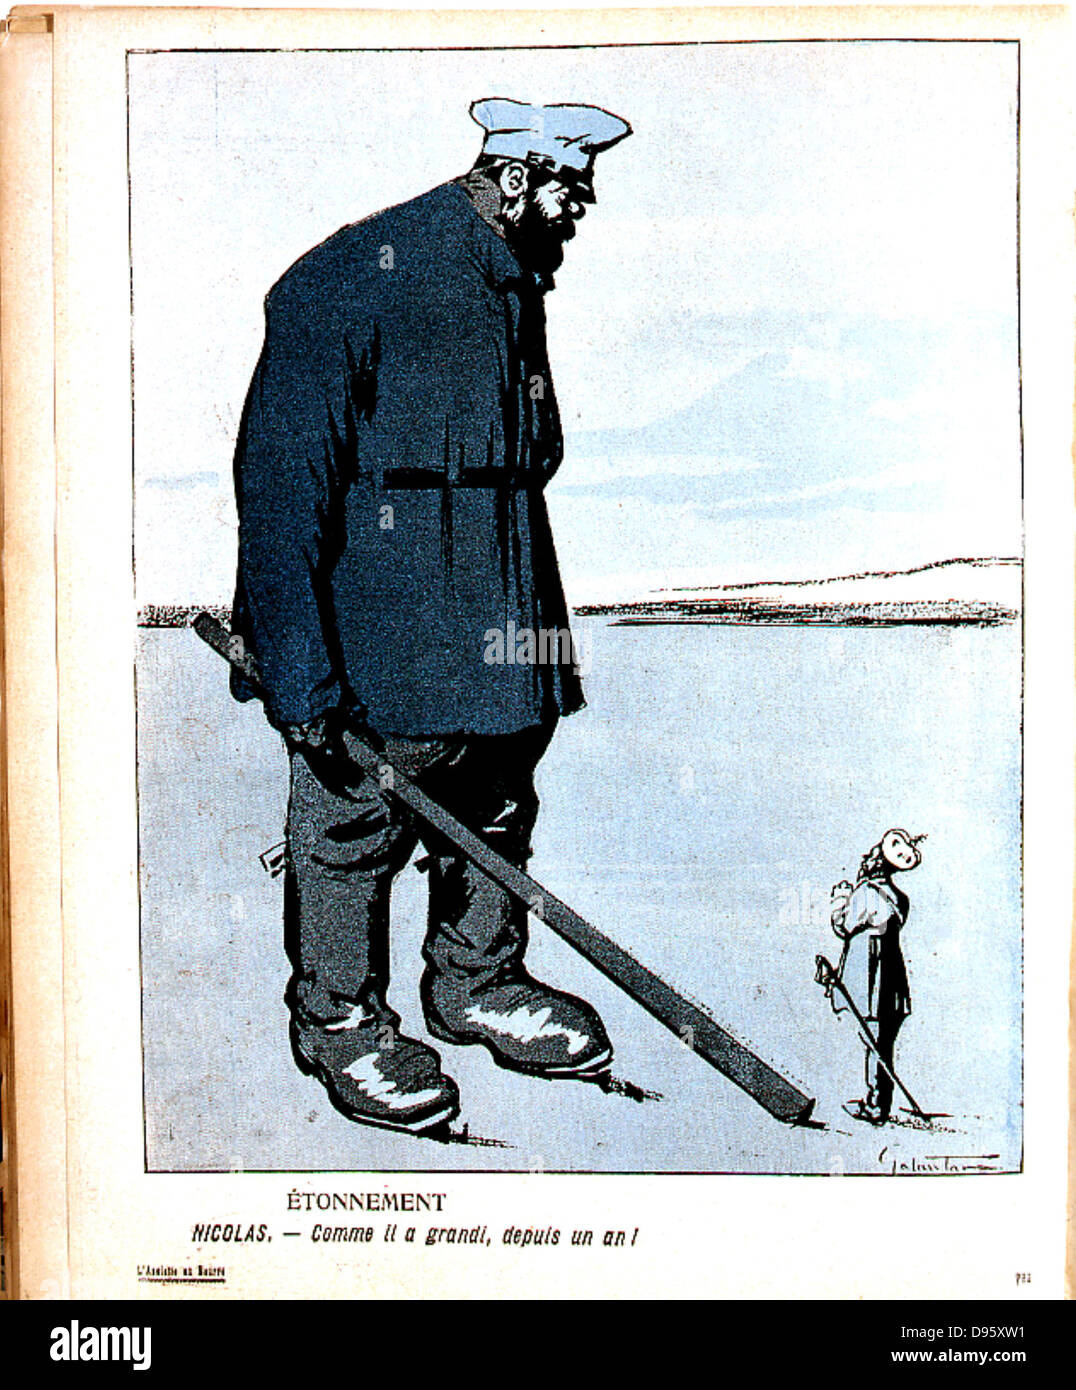 Nicholas II (1868-1919) Tsar of Russia from 1894, dwarfed by the awakening of the Russian people. Cartoon from 'L'Assiette au Buerre', Paris, 10 February 1906. Stock Photo